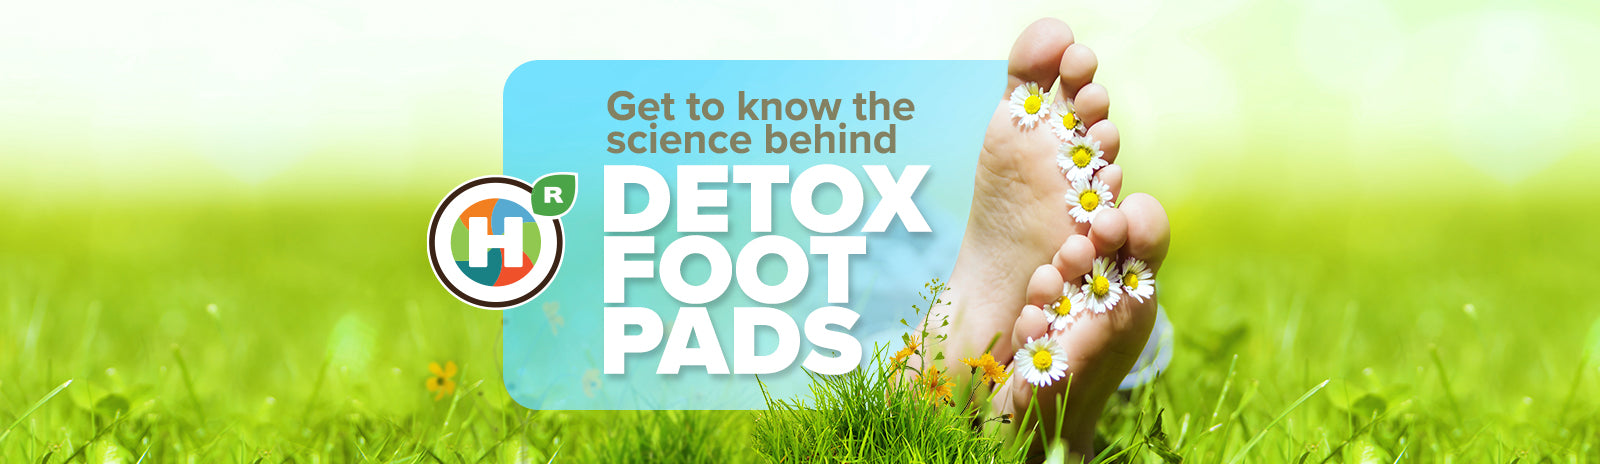 The science behind detox foot pads